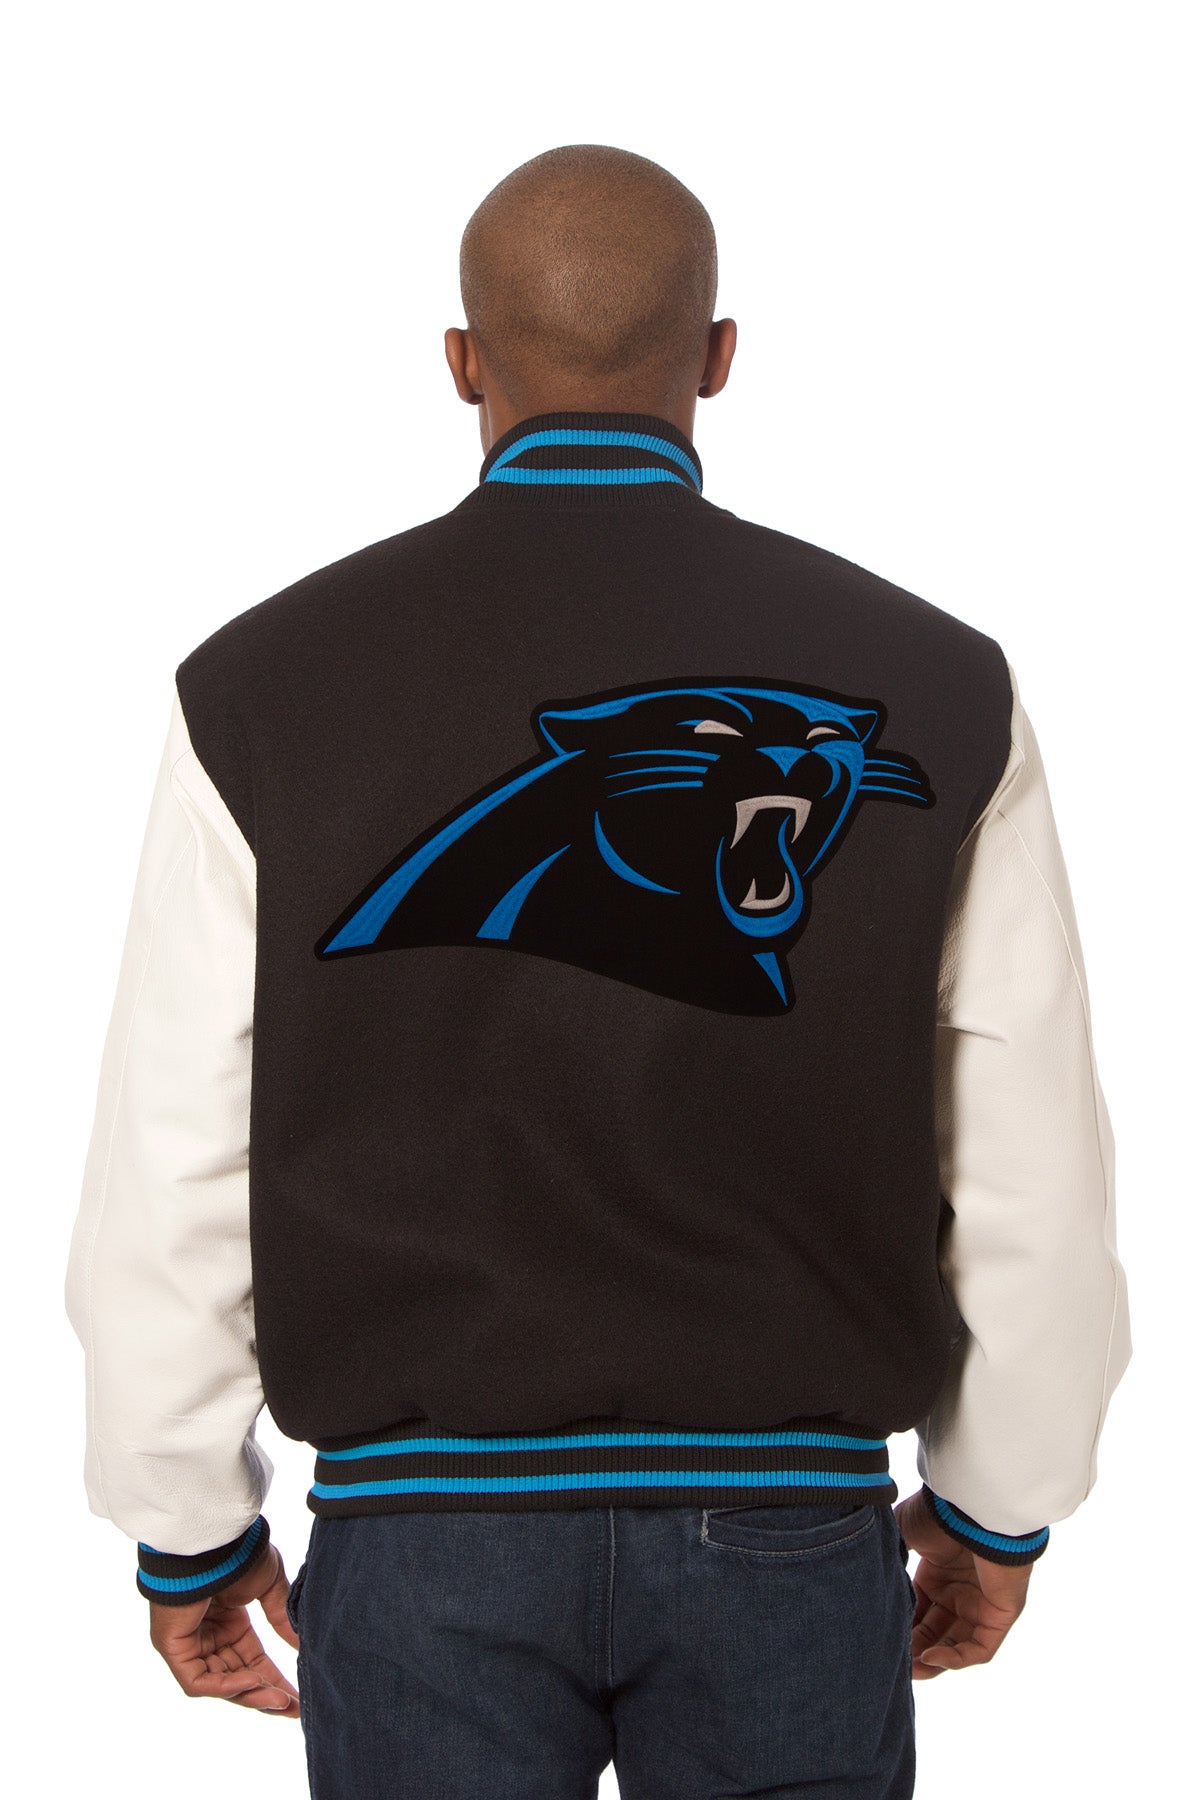 Carolina Panthers Embroidered Wool and Leather Jacket